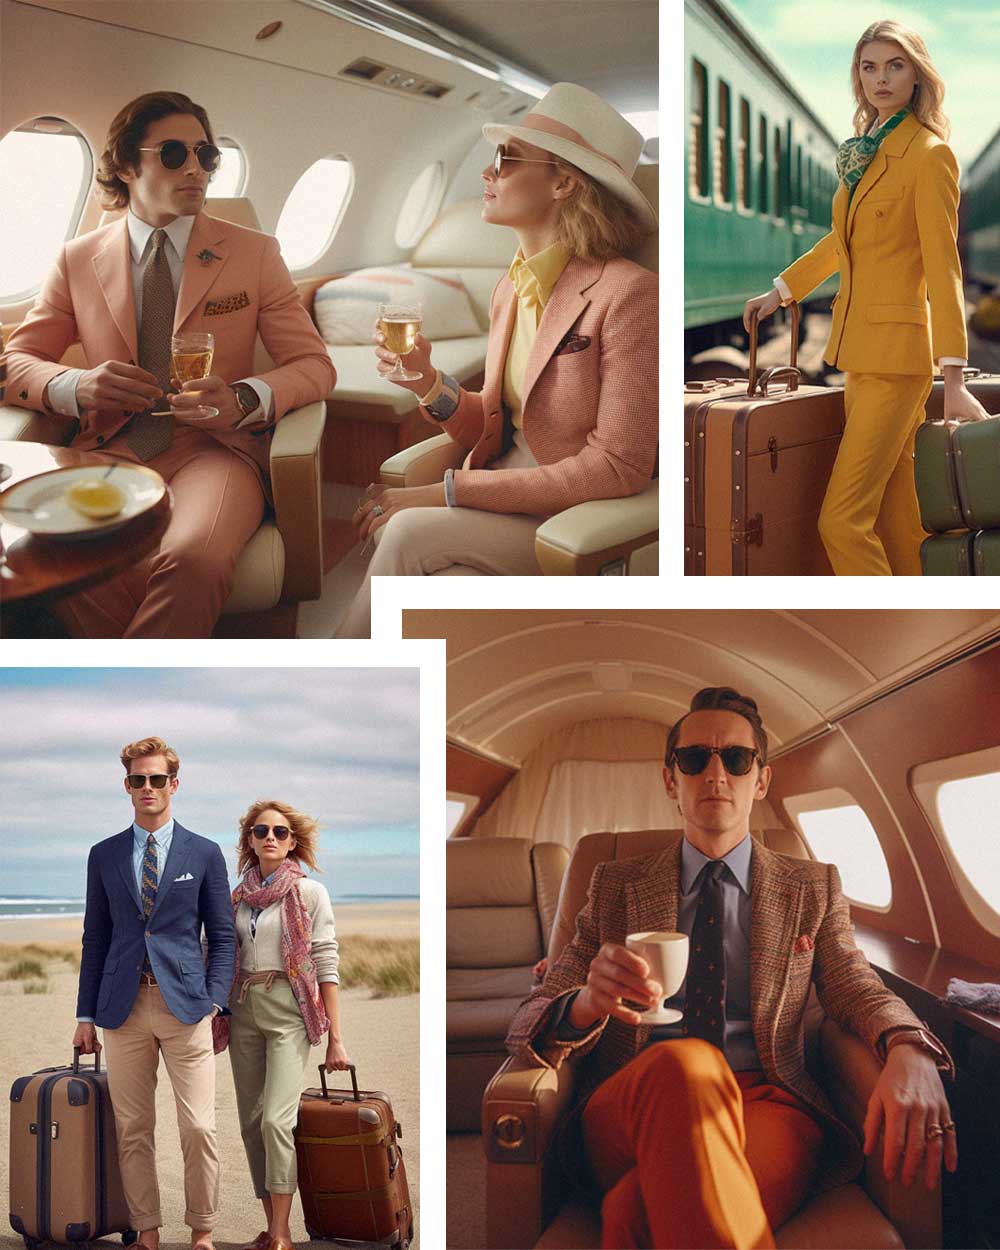 preppy travelling private plane, train, and doing business